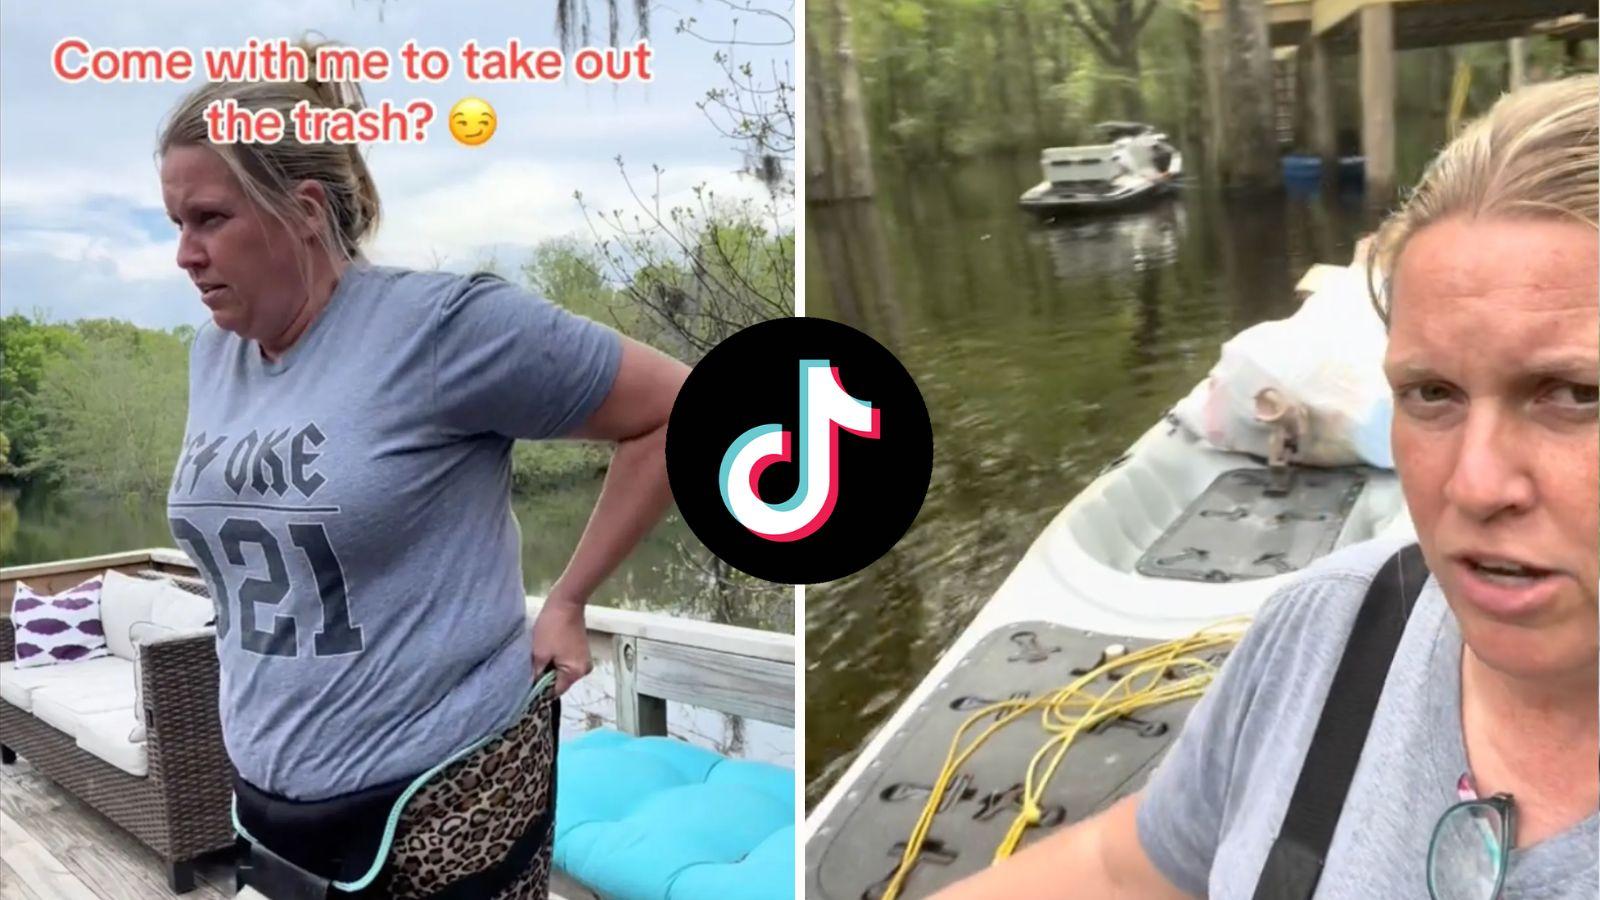 Woman braves gator-infested waters to take out trash